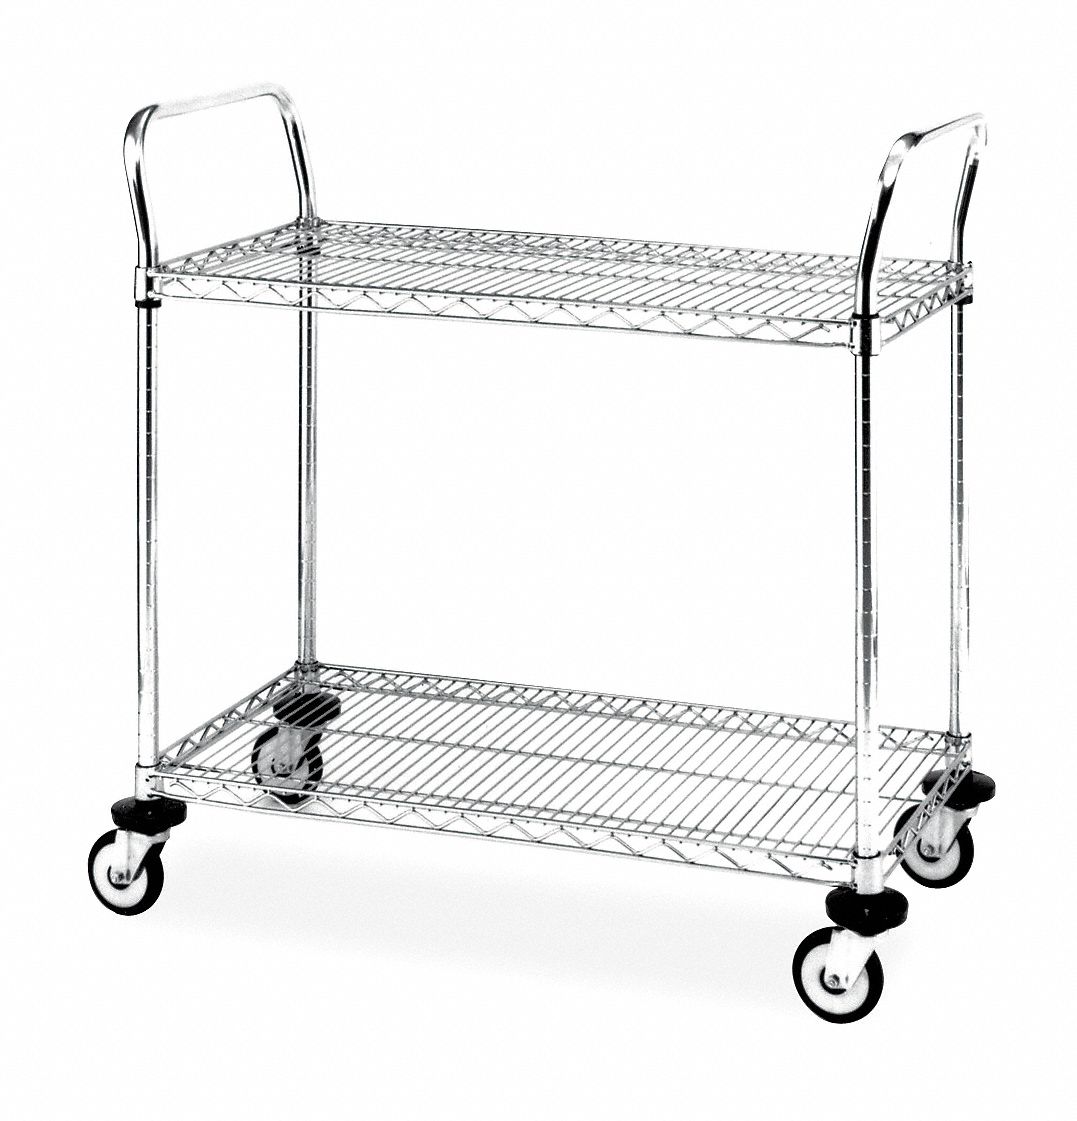 METRO WIRE CART,18 IN. W,48 IN. L,CHROME - Wire Shelf and Utility Carts -  WWG4W649